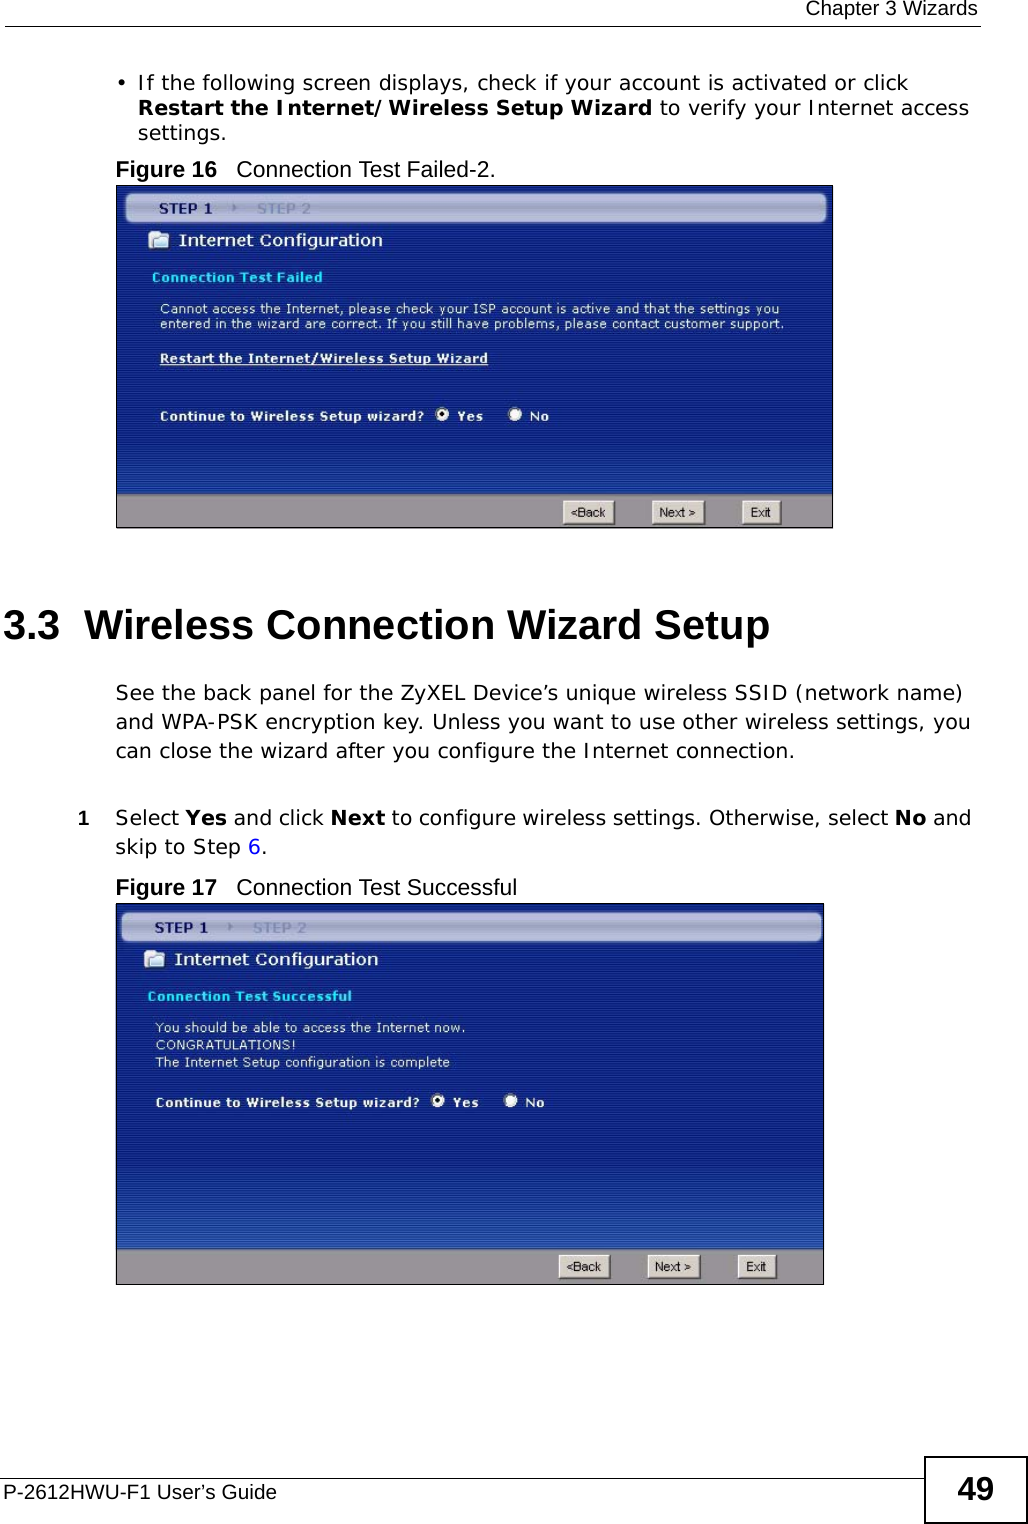  Chapter 3 WizardsP-2612HWU-F1 User’s Guide 49• If the following screen displays, check if your account is activated or click Restart the Internet/Wireless Setup Wizard to verify your Internet access settings. Figure 16   Connection Test Failed-2.3.3  Wireless Connection Wizard SetupSee the back panel for the ZyXEL Device’s unique wireless SSID (network name) and WPA-PSK encryption key. Unless you want to use other wireless settings, you can close the wizard after you configure the Internet connection.1Select Yes and click Next to configure wireless settings. Otherwise, select No and skip to Step 6.Figure 17   Connection Test Successful